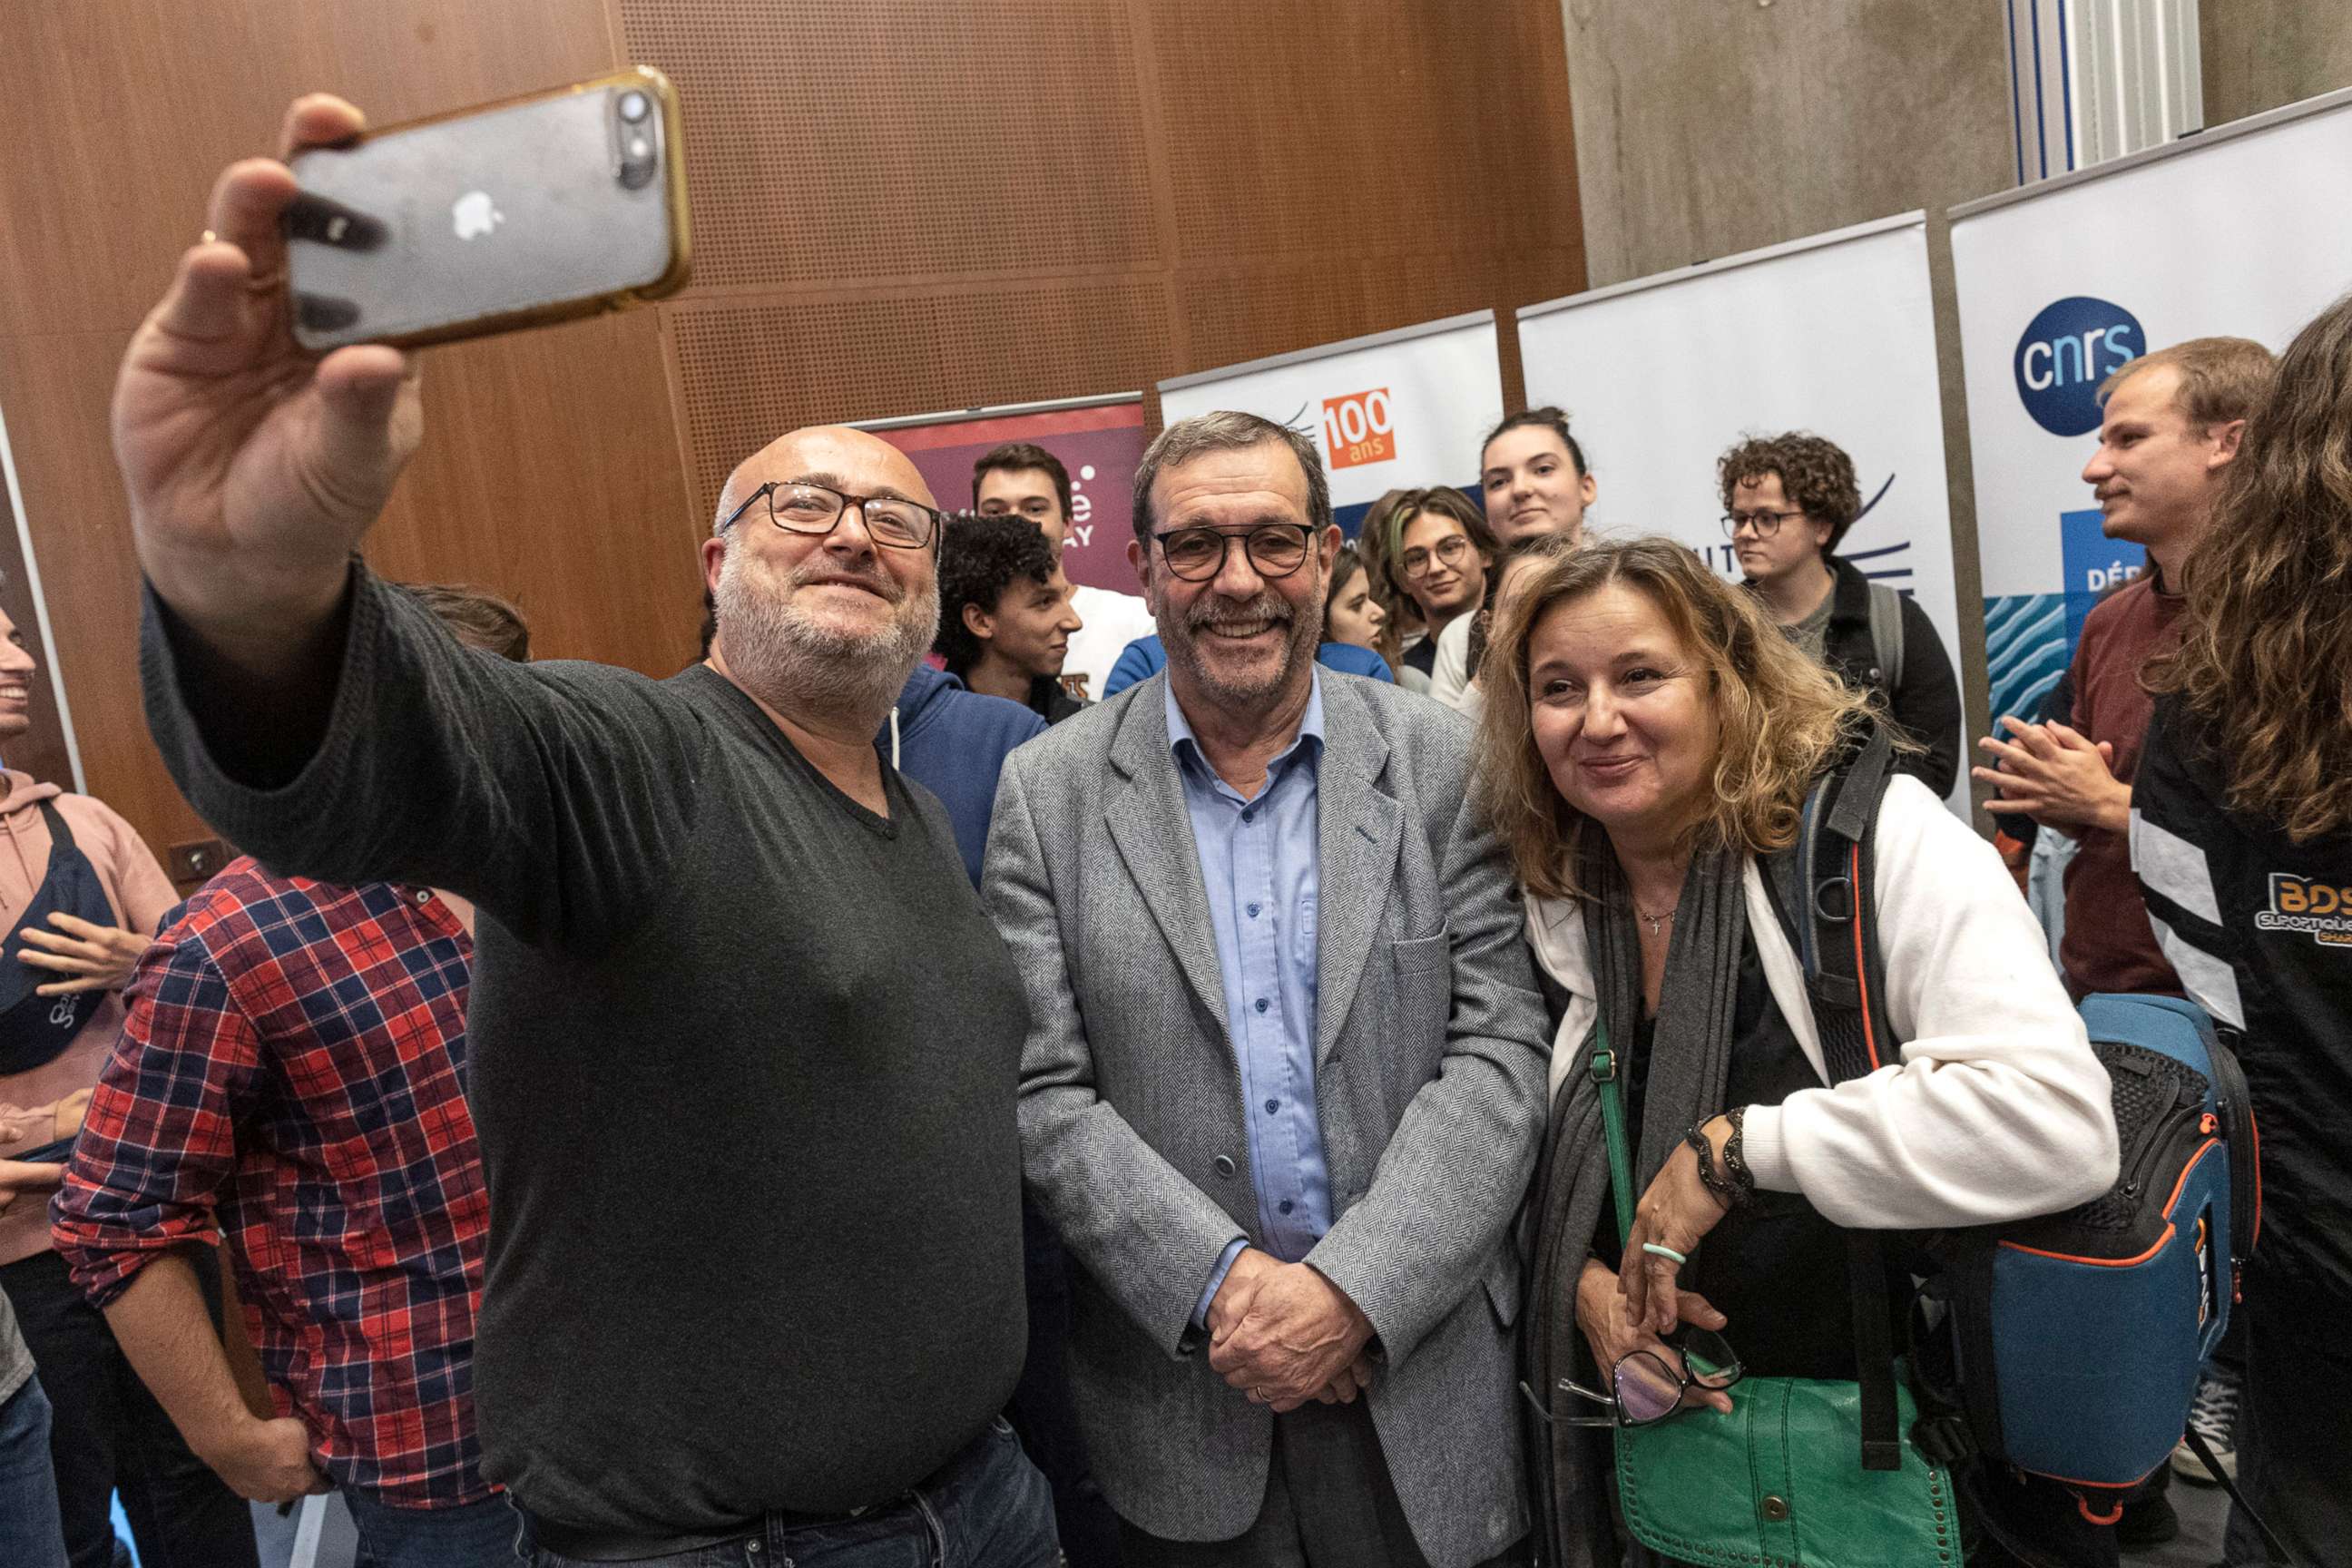 PHOTO: French physicist Alain Aspect takes photos with wellwishers at a press conference after winning the Nobel Prize, on Oct. 4, 2022 in Palaiseau, France. The Nobel Prize in Physics 2022 was awarded jointly to Aspect, John F Clauser and Anton Zeilinger